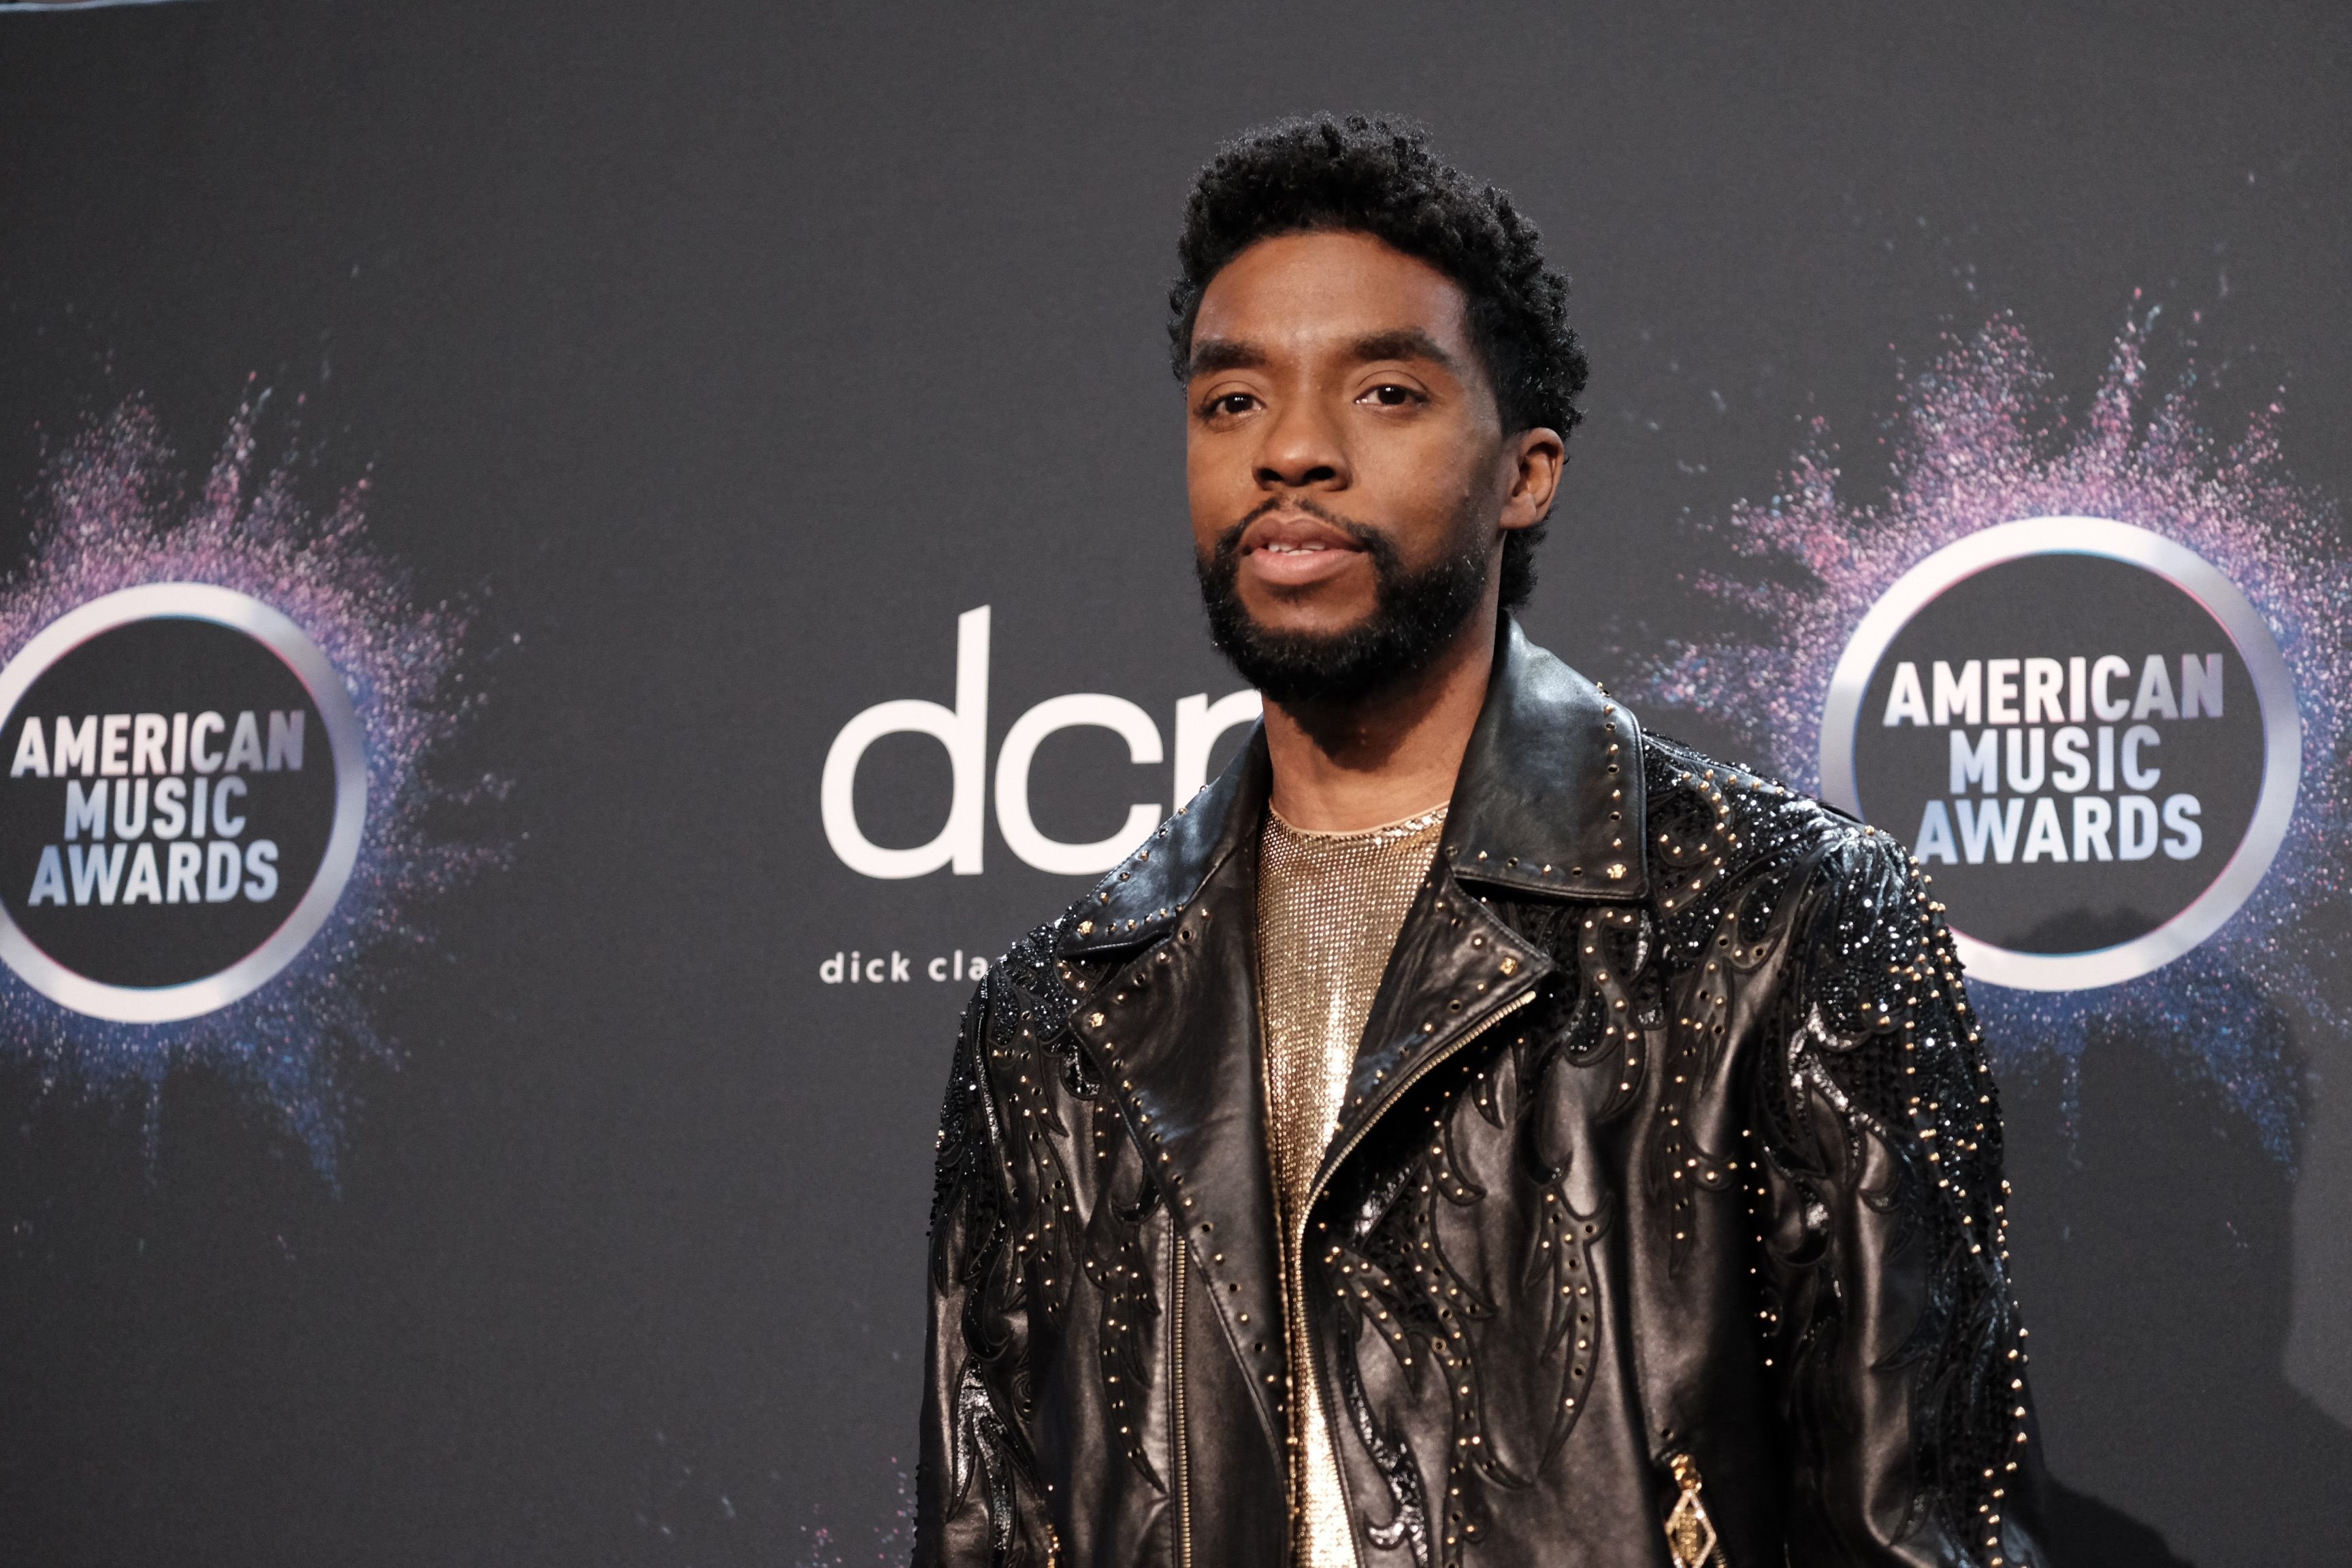 Chadwick Boseman during the 2019 American Music Awards at Microsoft Theater on November 24, 2019 in Los Angeles, California. | Source: Getty Images